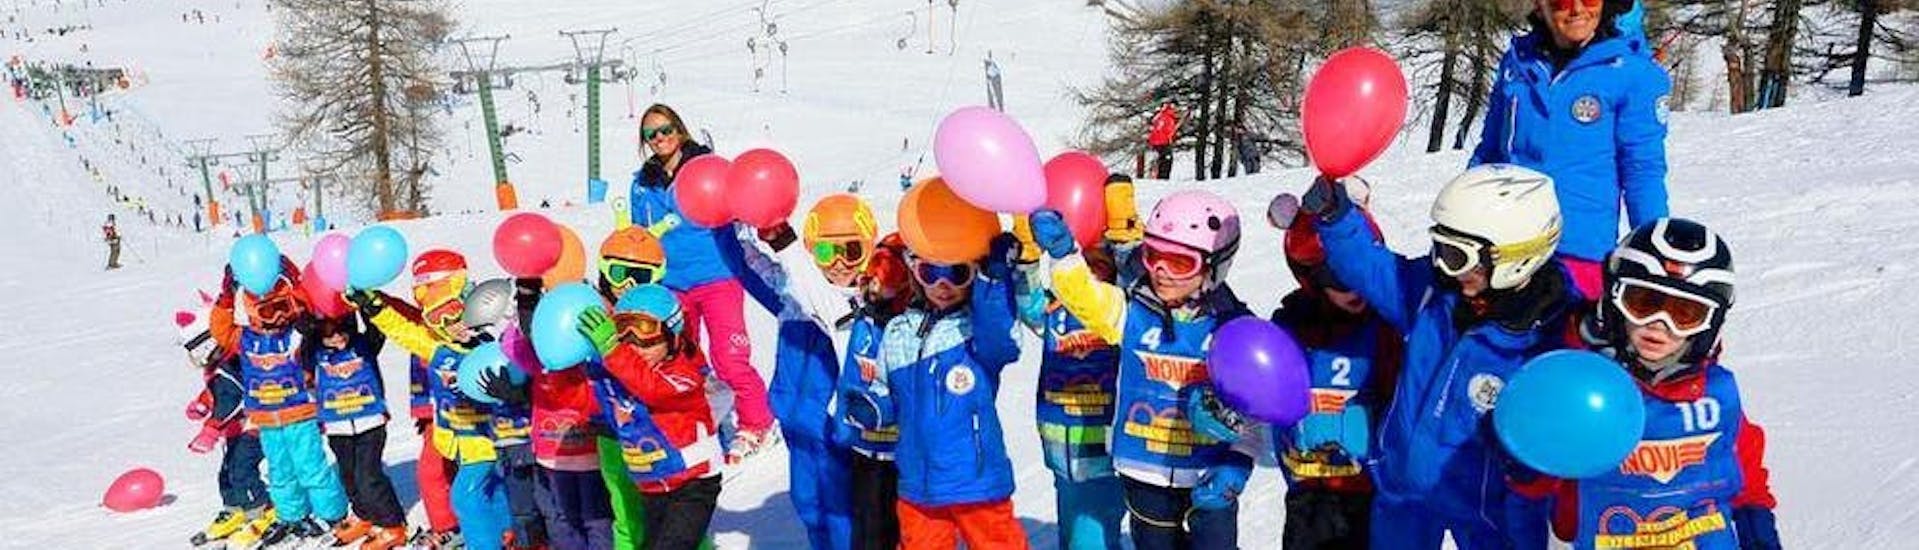 A group of children and their ski instructors from the ski school Scuola di Sci Olimpionica are posing for a photo on top of the mountain in Sestriere, before they get started with their Kids Ski Lessons (5-12 y.) - Advanced.